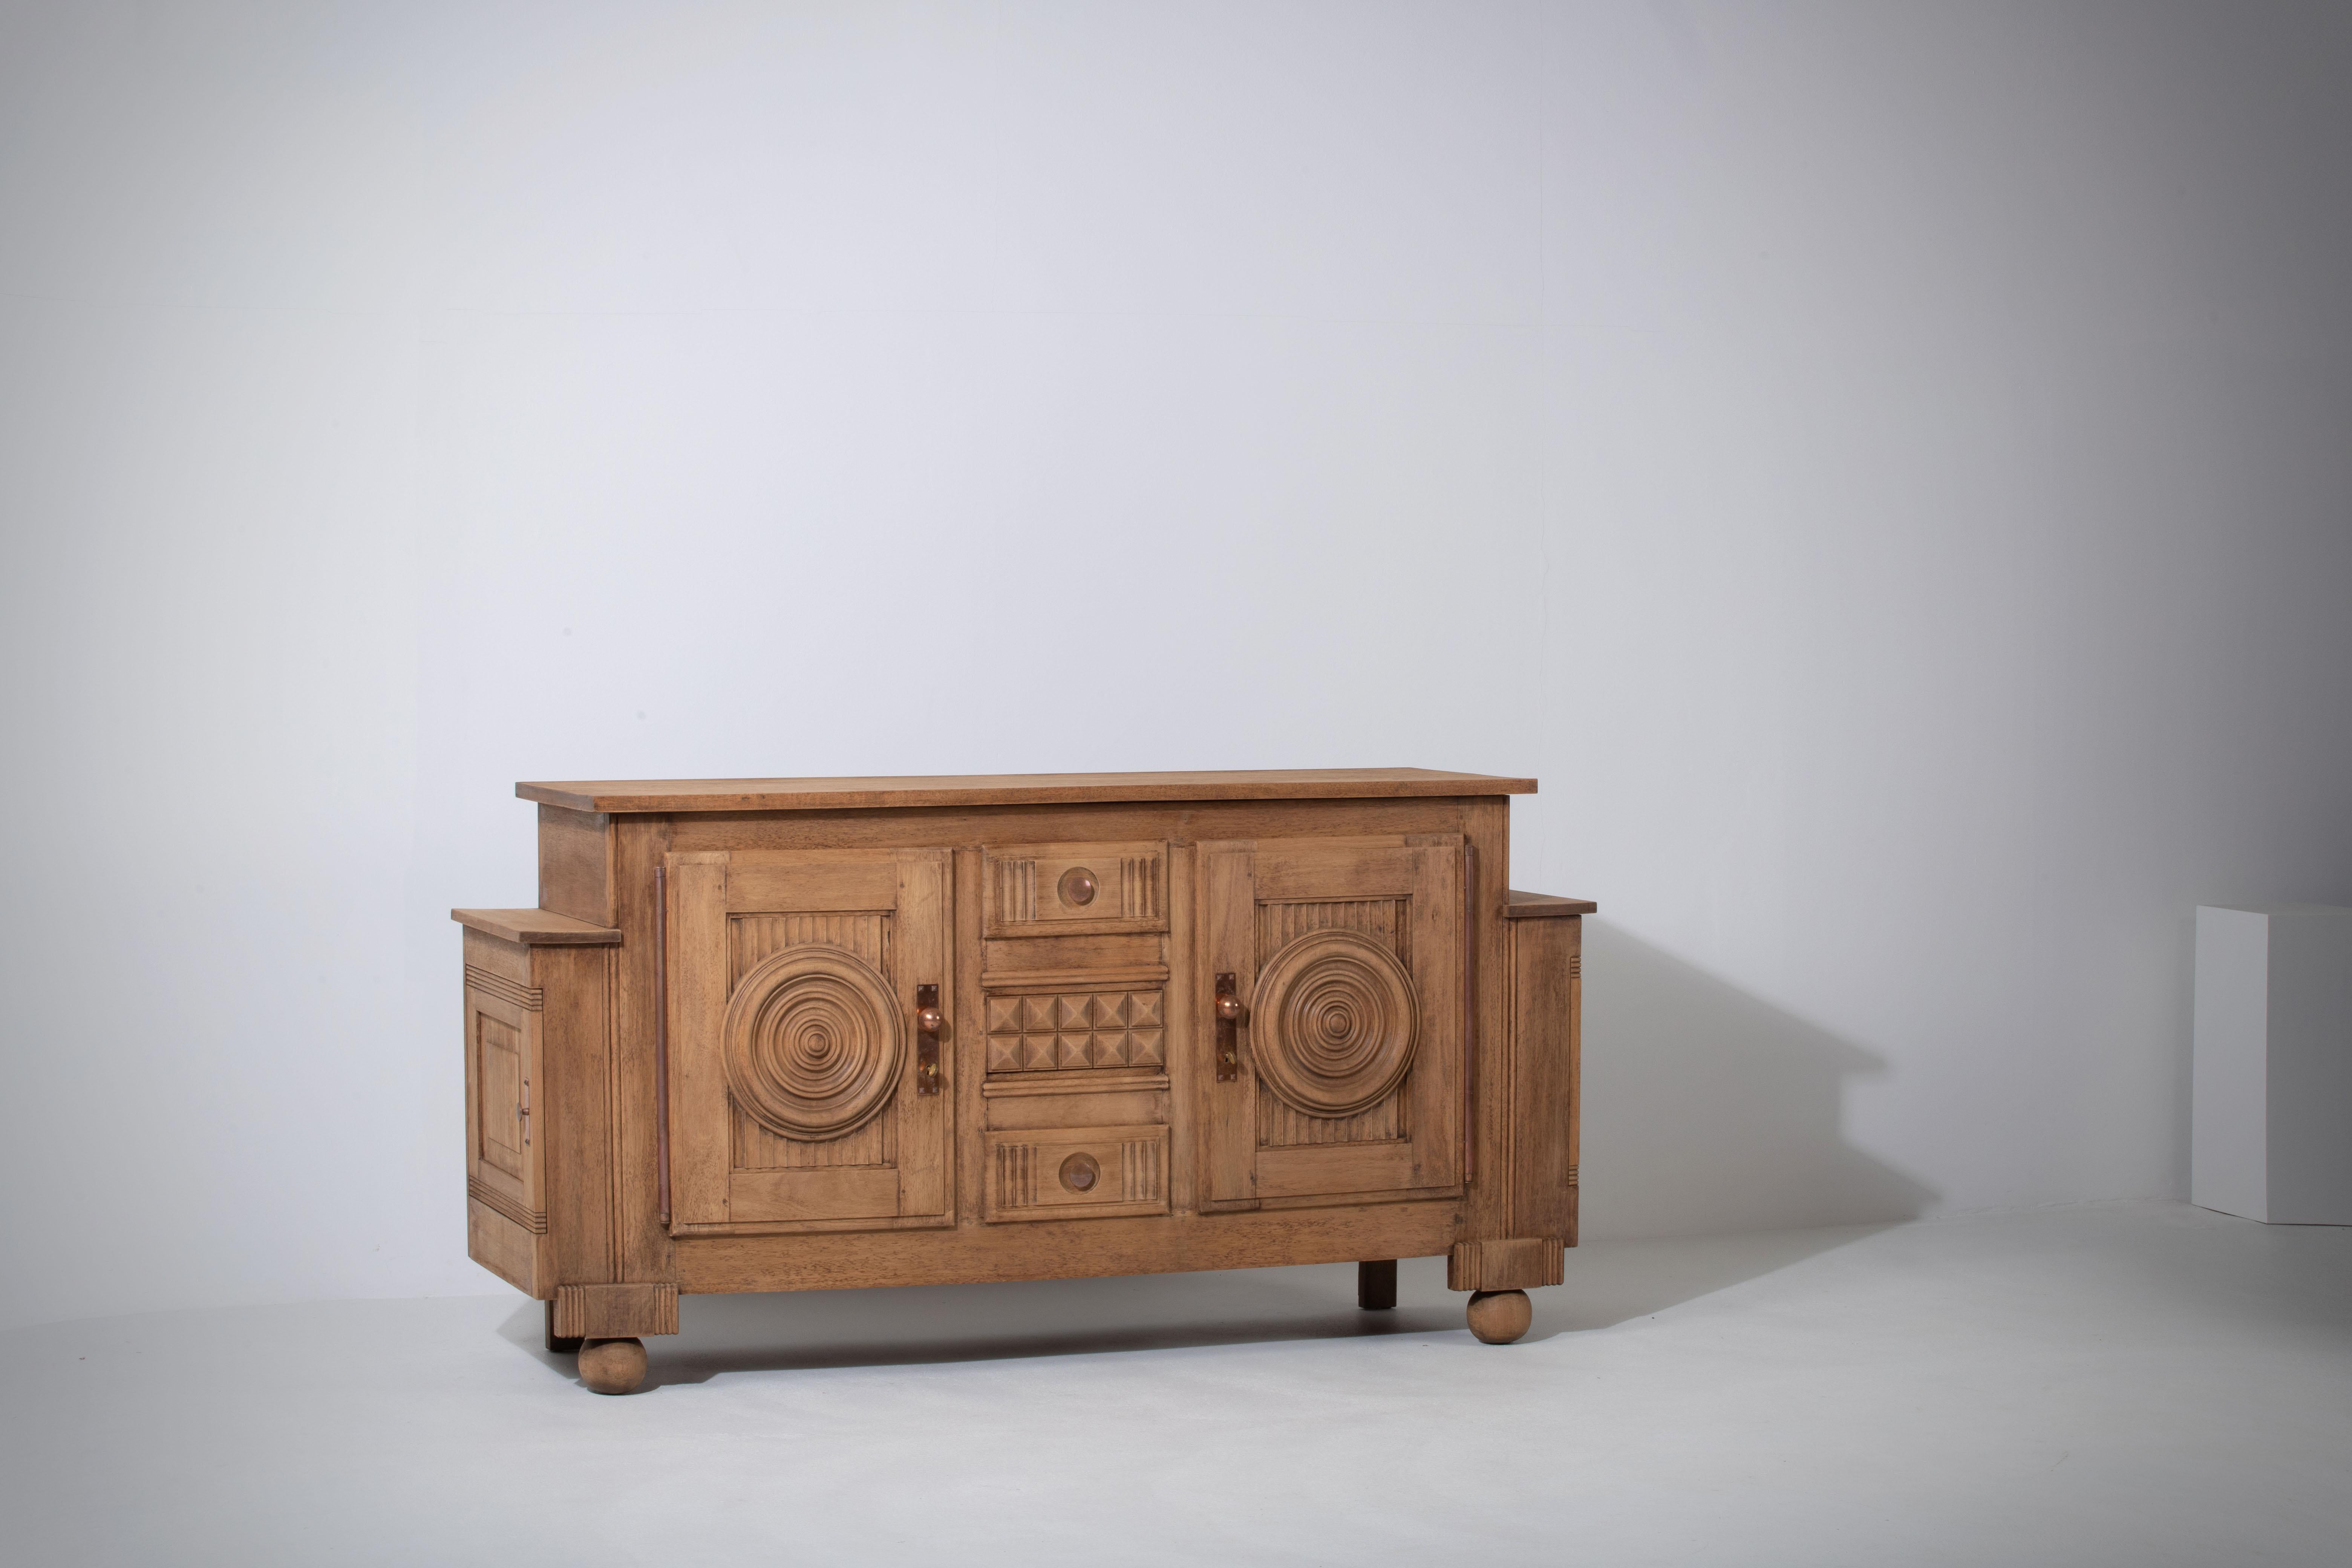 Introducing an extraordinary one-of-a-kind oak sideboard designed by the renowned French designer Charles Dudouyt in the 1940s. Charles Dudouyt was a prominent furniture designer in the early to mid-20th century, known for his remarkable